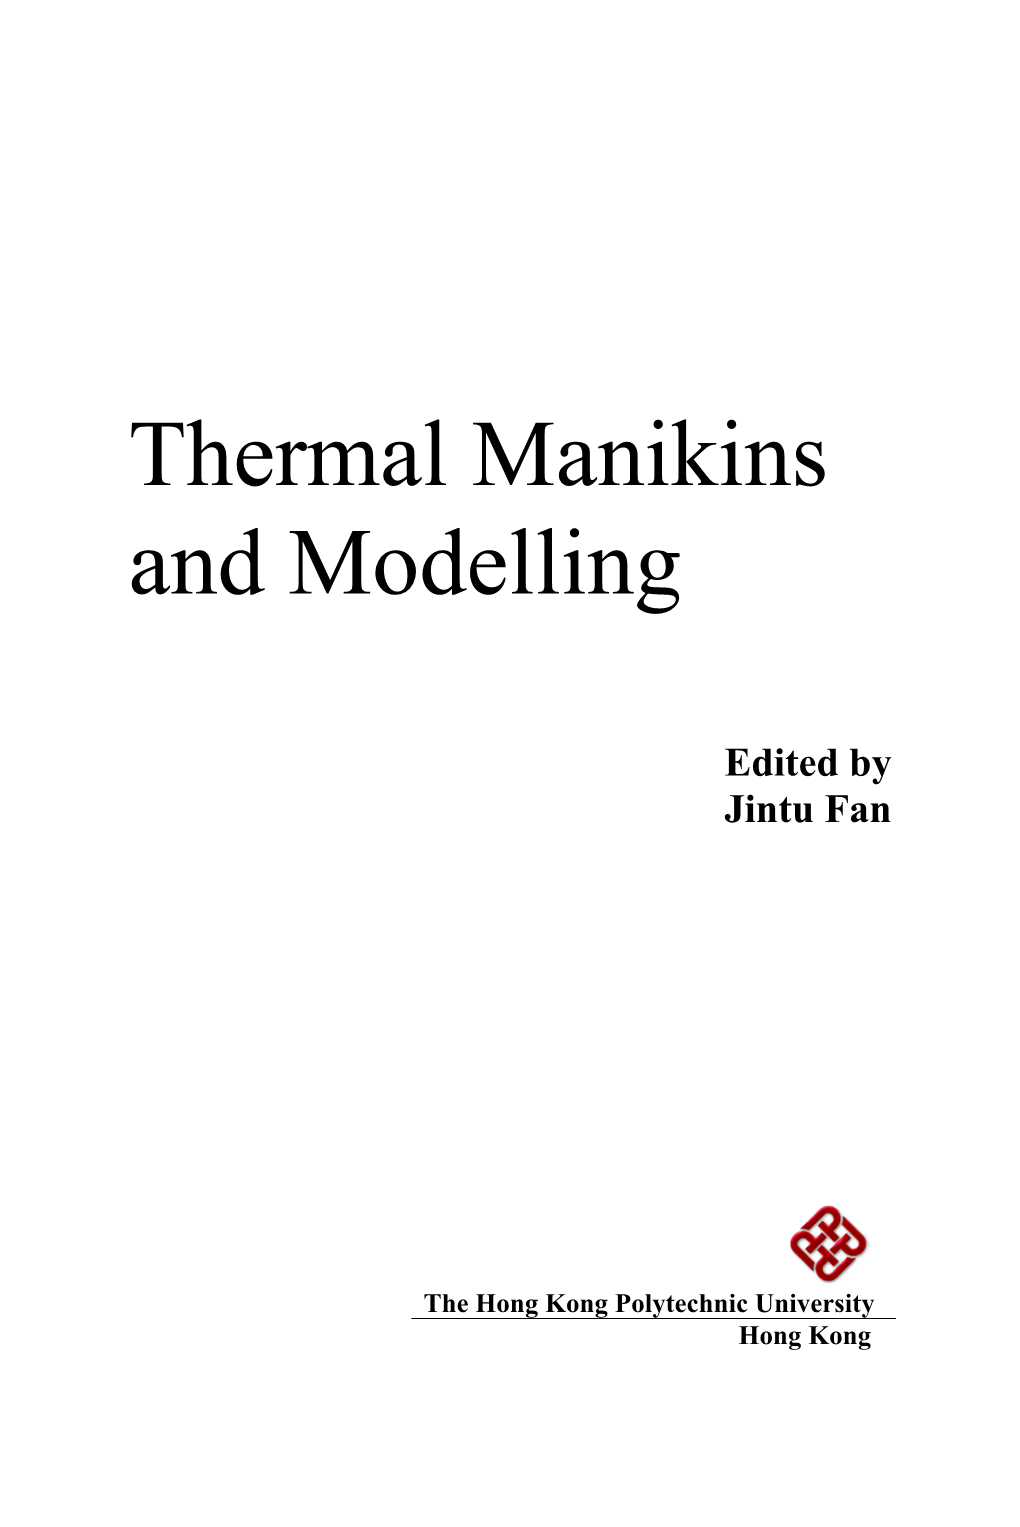 Thermal Manikins and Modelling